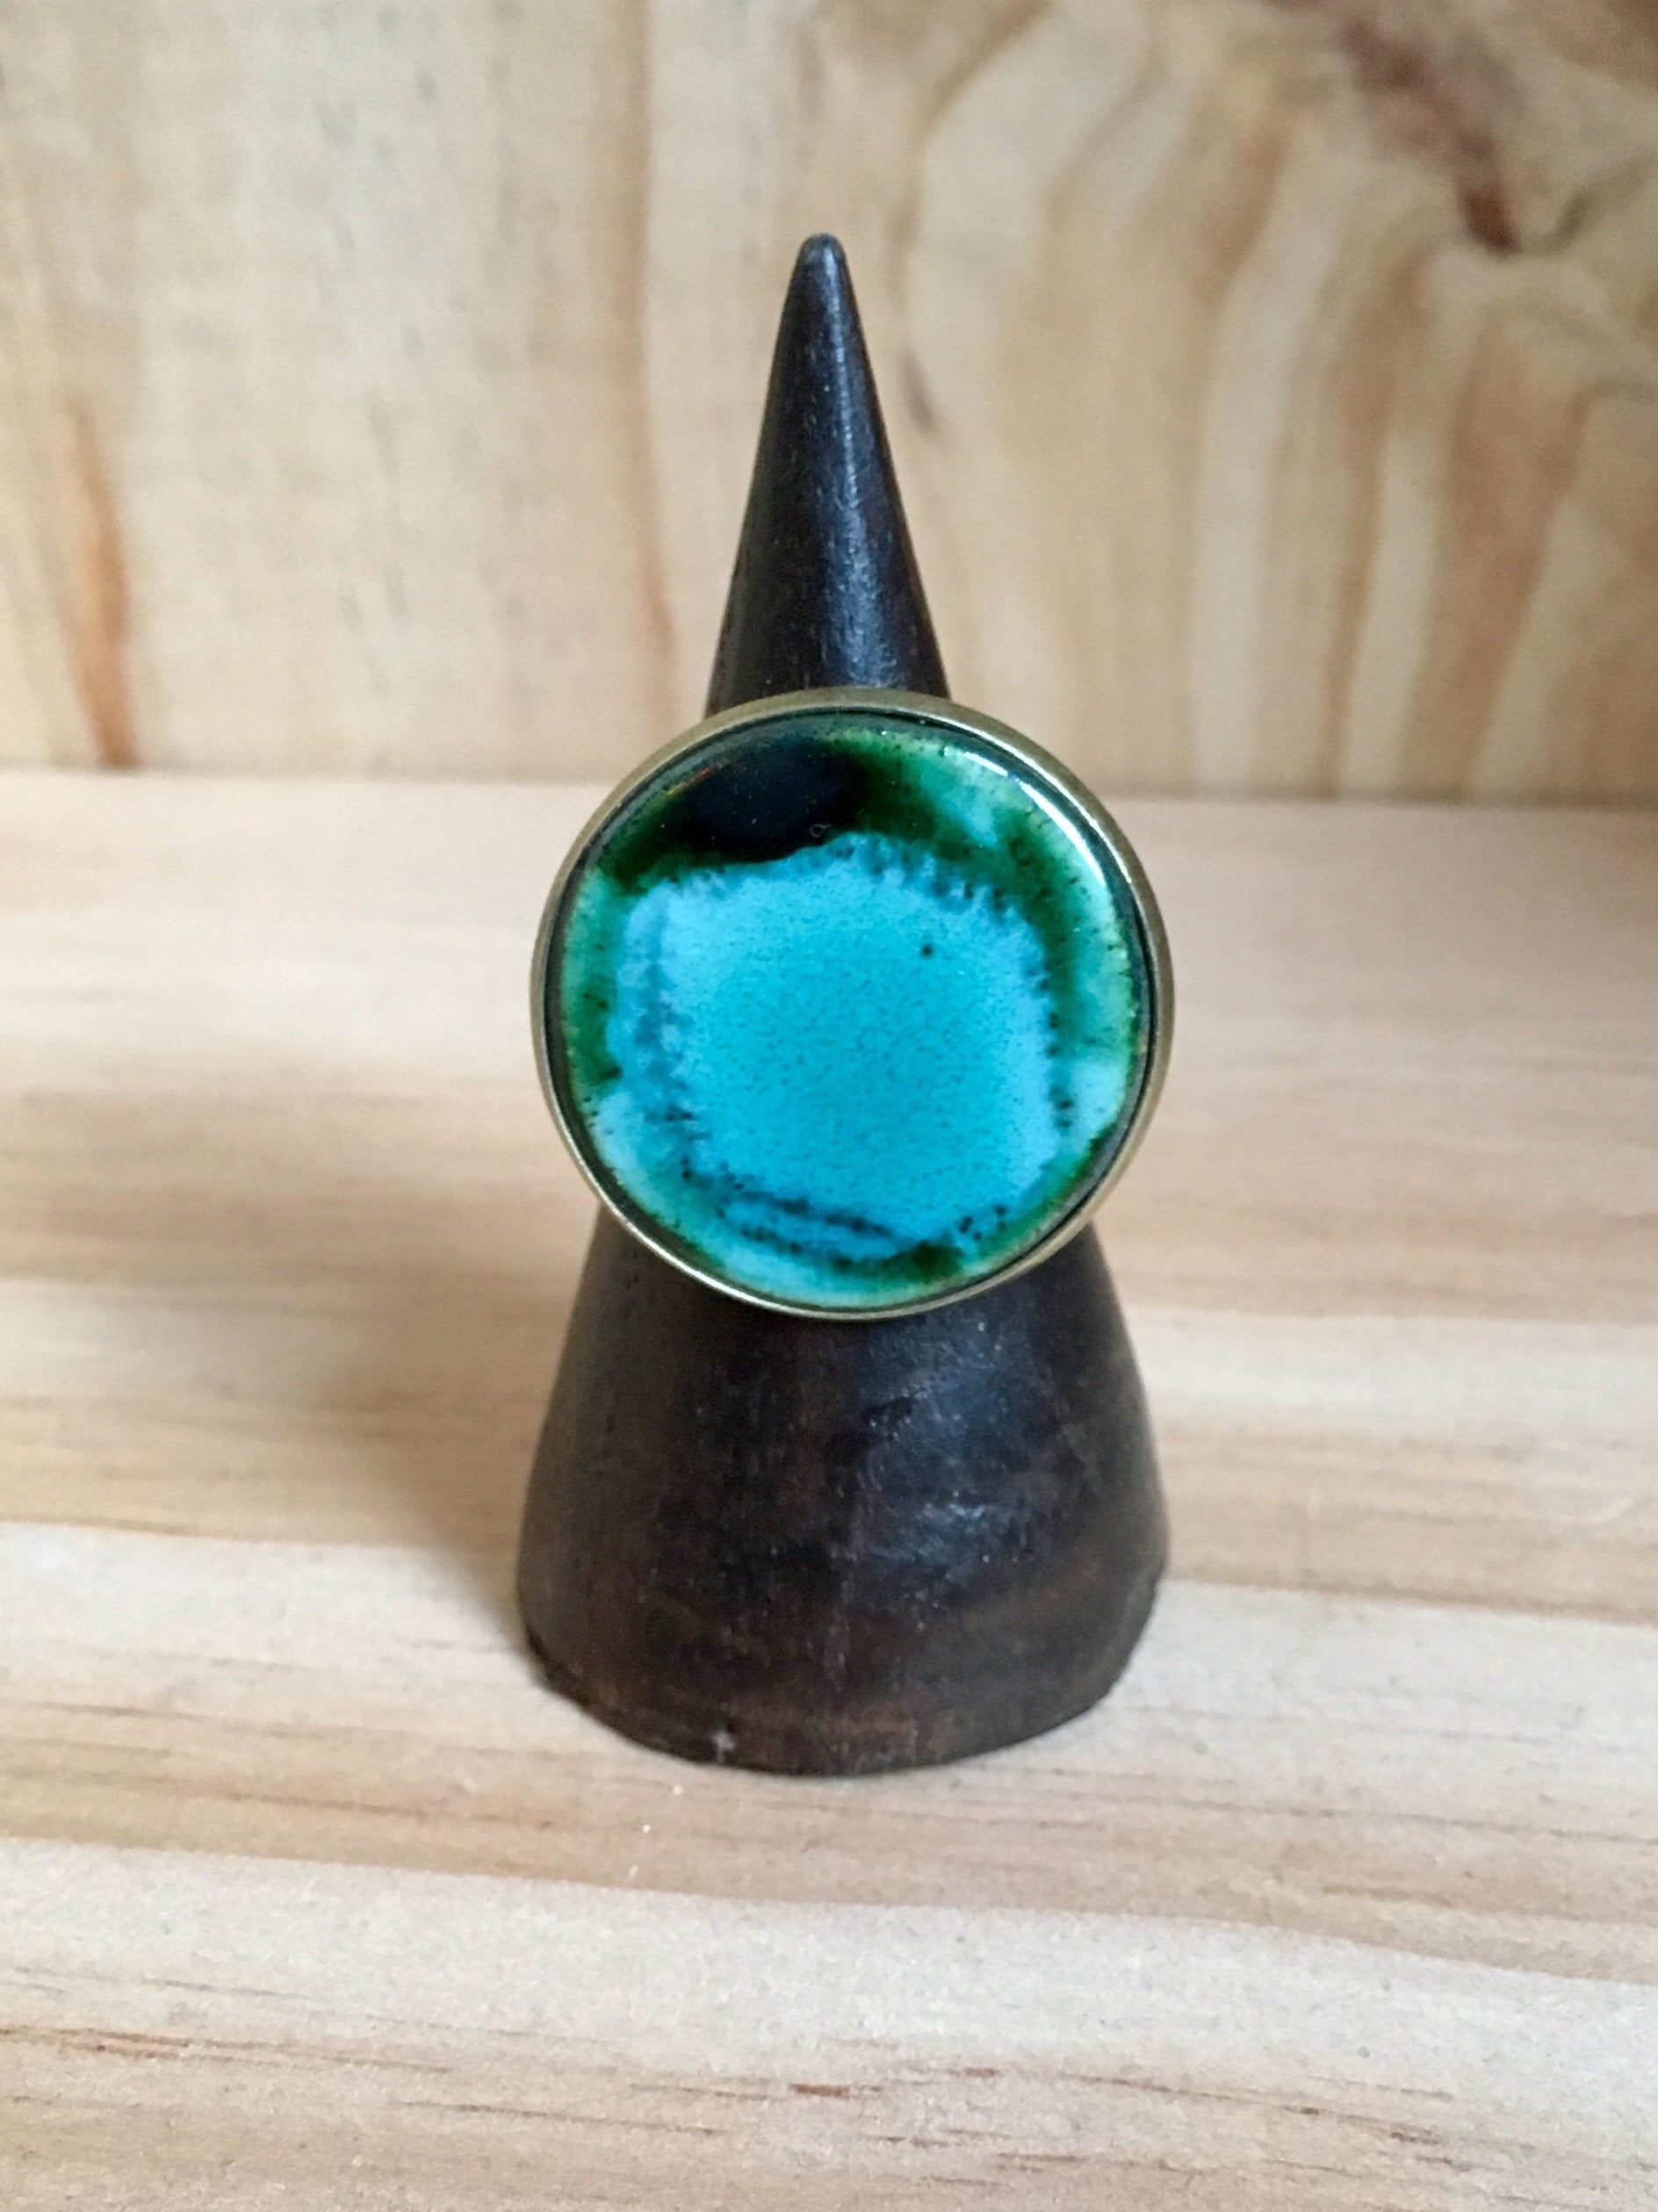 Gorgeous Adjustable Handmade Statement Ceramic Ring in Black and Teal